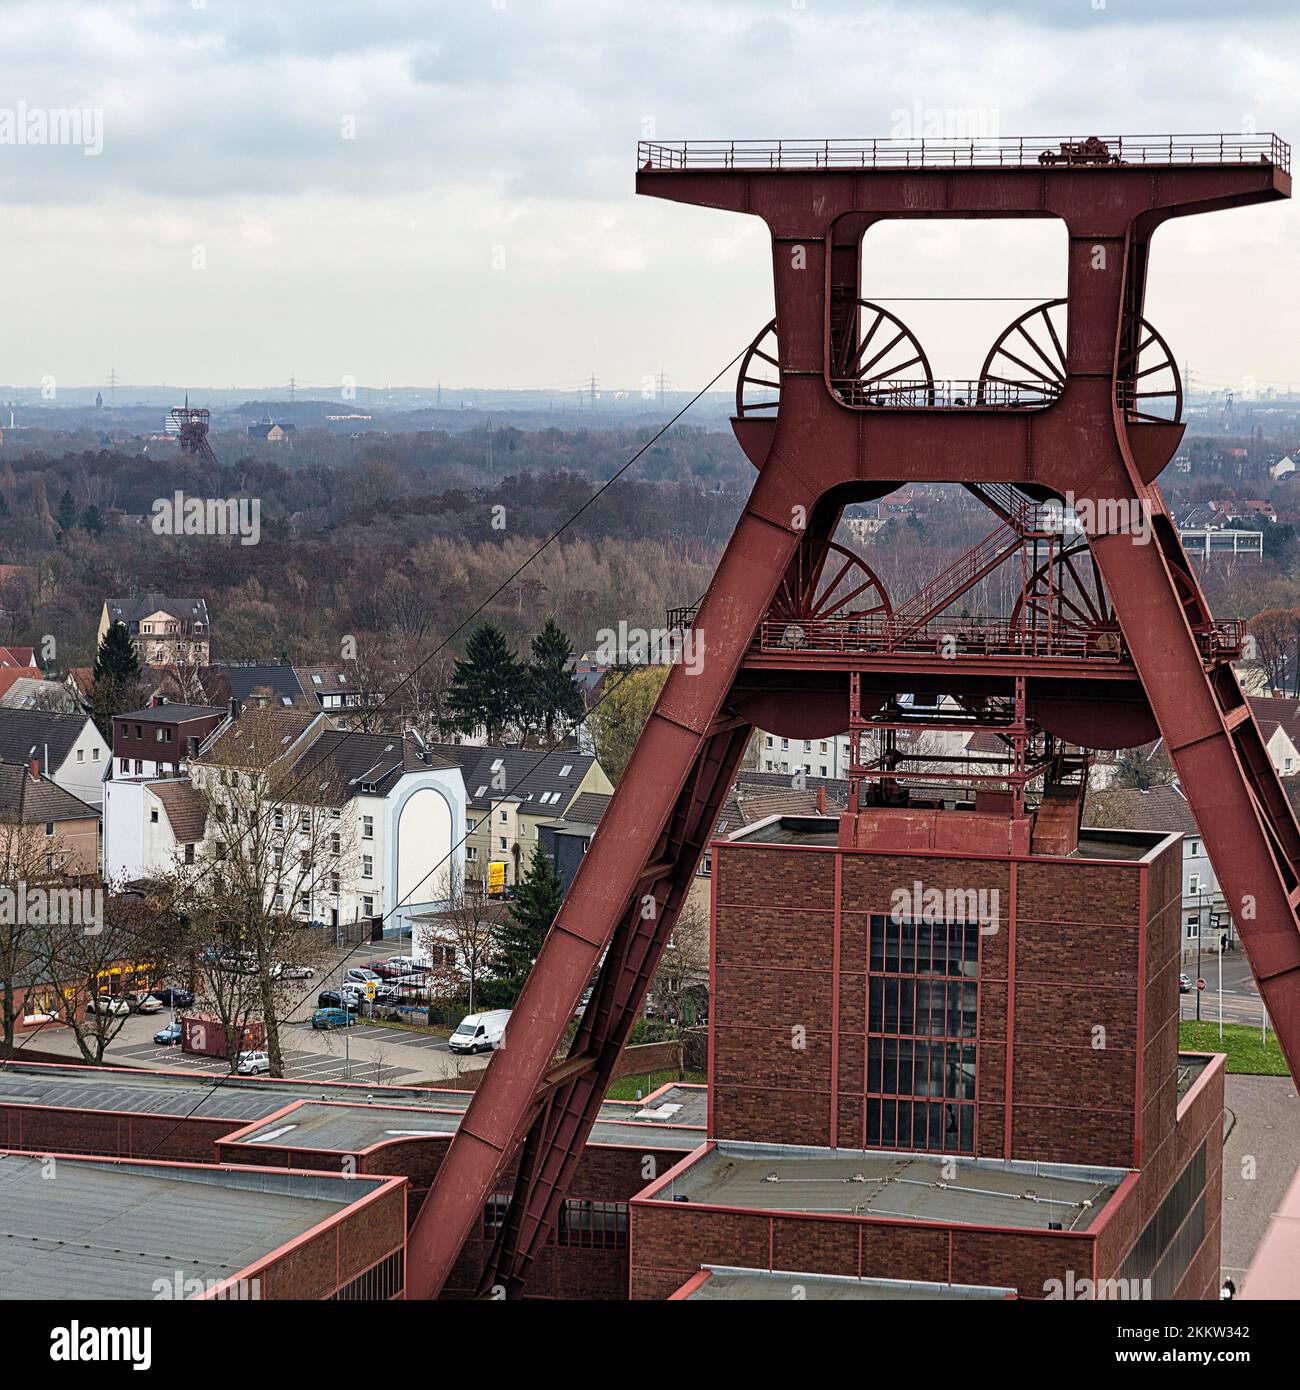 View of the winding tower from the viewing platform, Zeche Zollverein, former coal mine, industrial monument, dreary winter weather, Essen, Ruhr area, Stock Photo